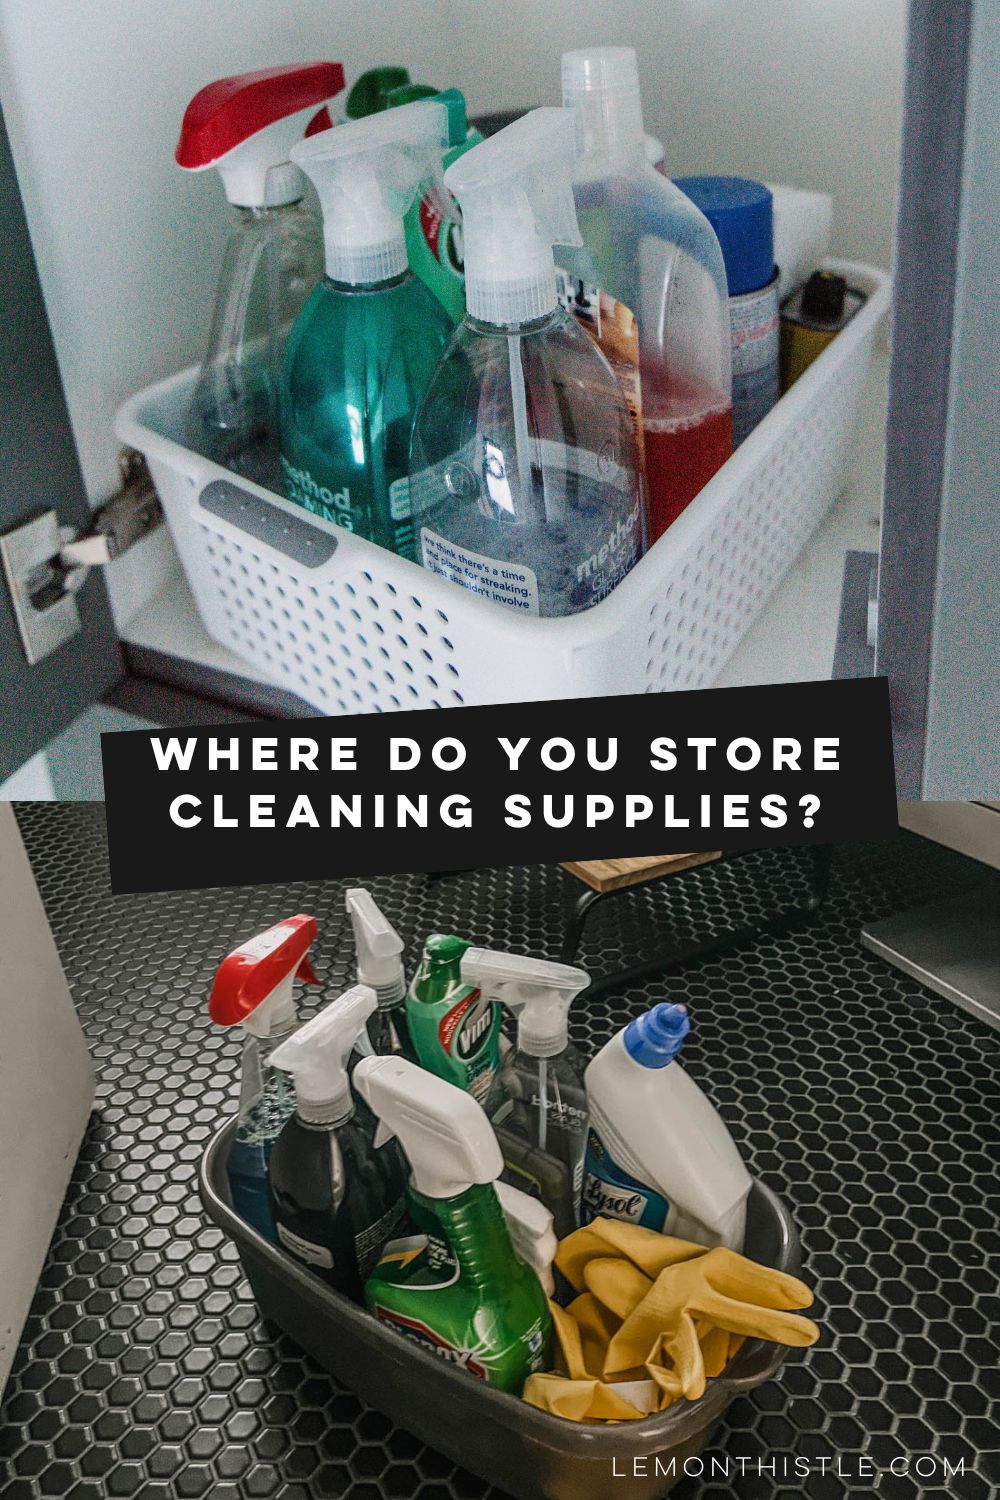 images of a basket of cleaning supplies in a cupboard and a carrying caddy of cleaning supplies in a bathroom with text: where do you store cleaning supplies?